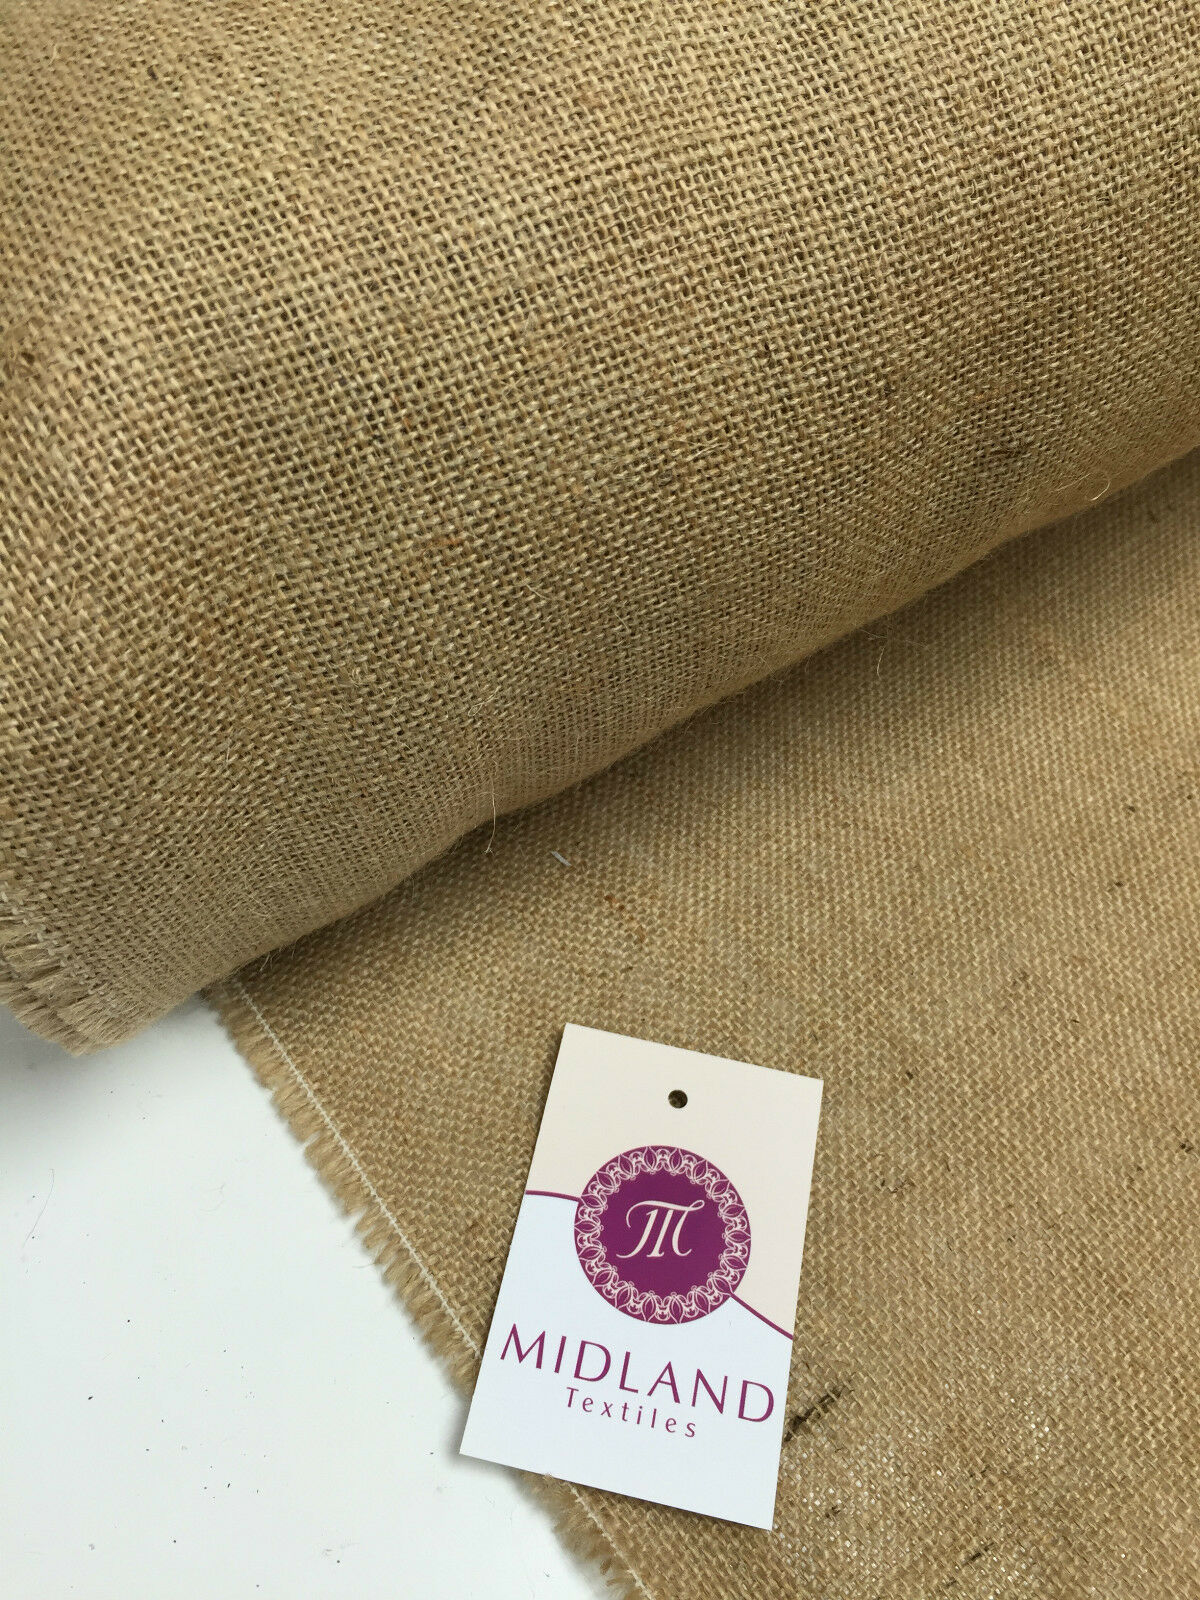 10oz Hessian Jute ideal for craft, bags sacks cloths & upholstery 60" Wide M50-2